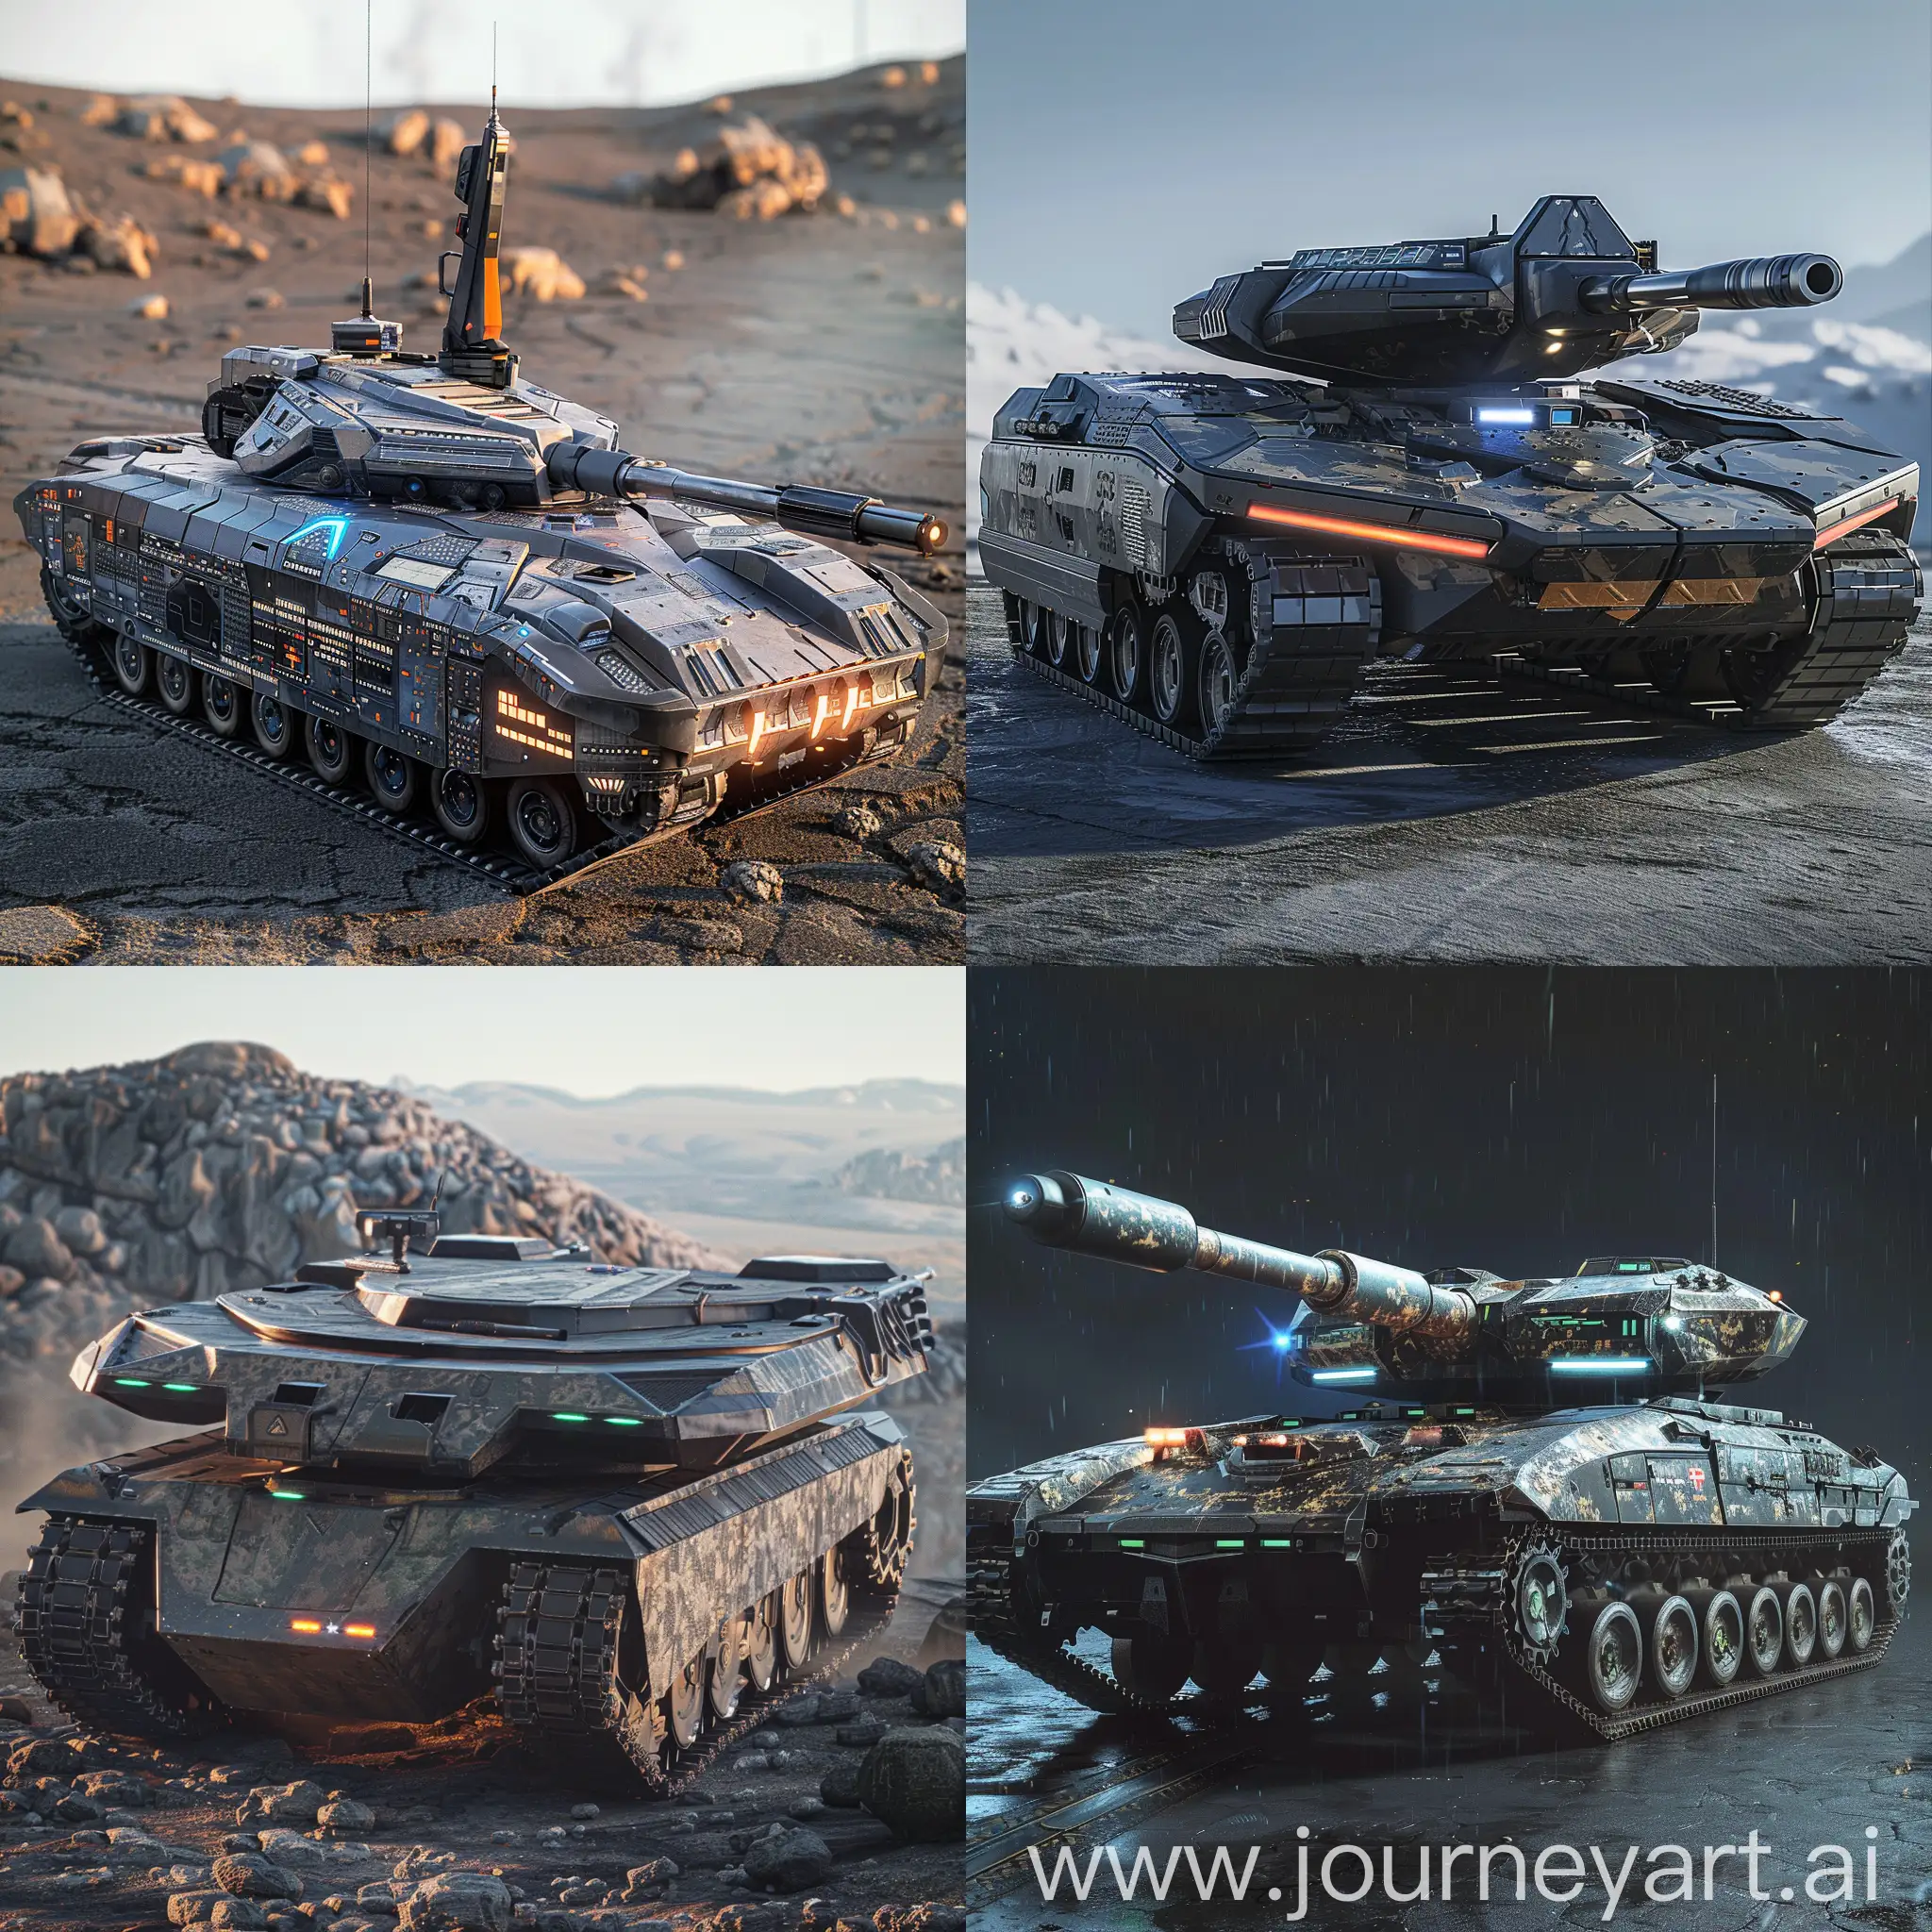 Futuristic tank, in futuristic style, Advanced Armor Materials, AI-Driven Combat Systems, Electric Propulsion Systems, Active Protection Systems (APS), Modular Internal Architecture, Advanced Sensors and Reconnaissance, Integrated Cyber Defense Systems, Crew Augmentation Systems, Energy Weapons, Environmental Control and Sustainability Systems, Adaptive Camouflage, Modular Weapon Systems, Active Defense Shields, Enhanced Mobility Systems, Autonomous Drone Integration, Stealth Technology, Energy Harvesting Surfaces, External Communication and Sensor Arrays, Automated Repair Systems, Amphibious Capability, 2050, unreal engine 5 --stylize 1000